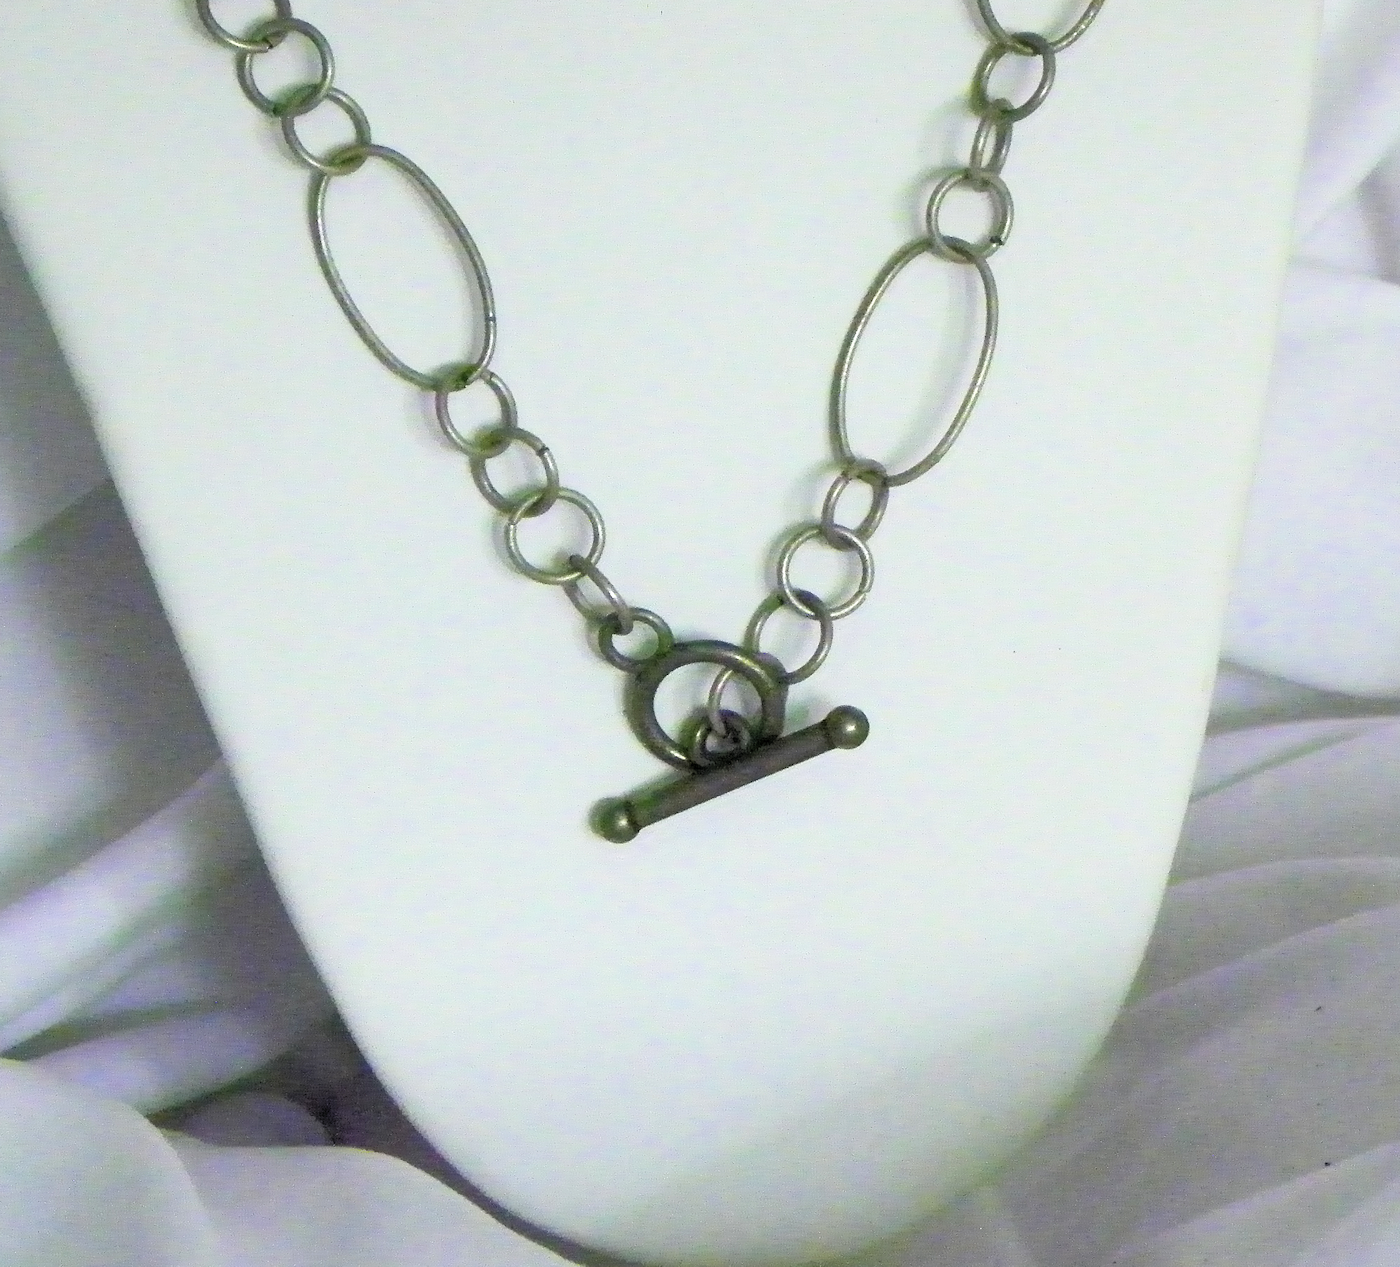 Pewter Finish Chain and Green Lampwork Glass Bead Necklace